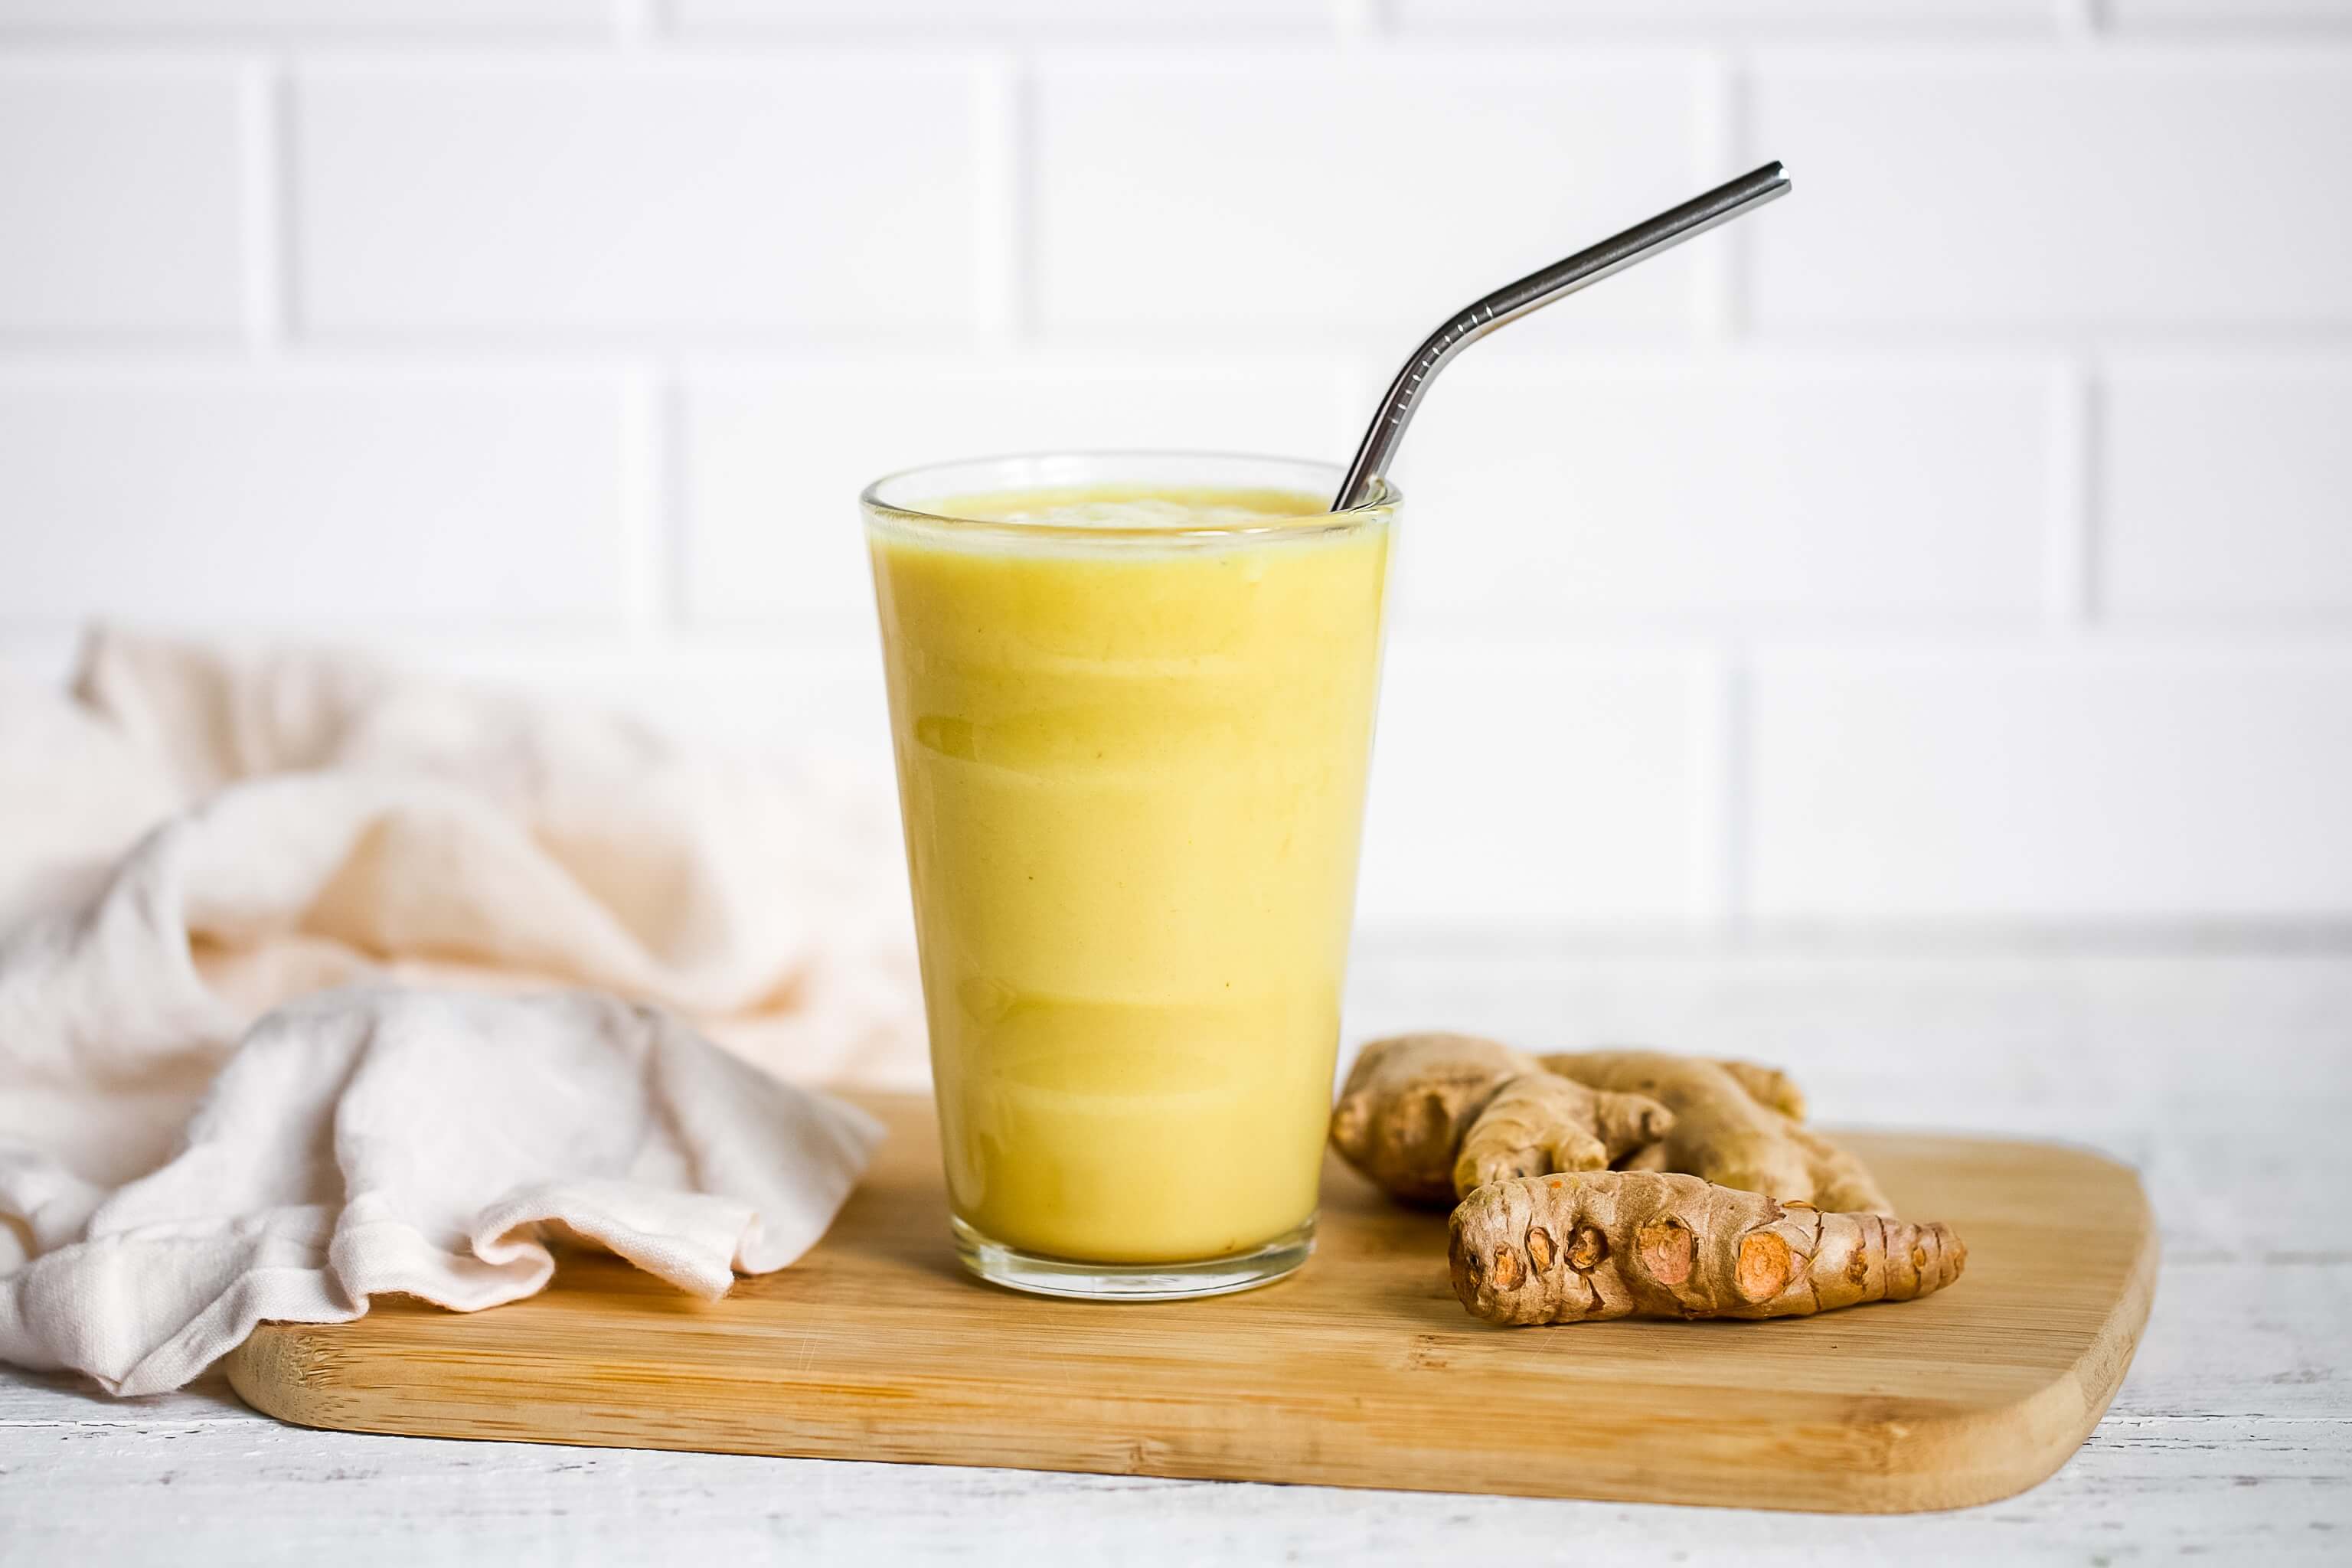 20 Specific Carbohydrate Diet Meals to Help Clients With Inflammatory Bowel Disease: Golden Smoothie